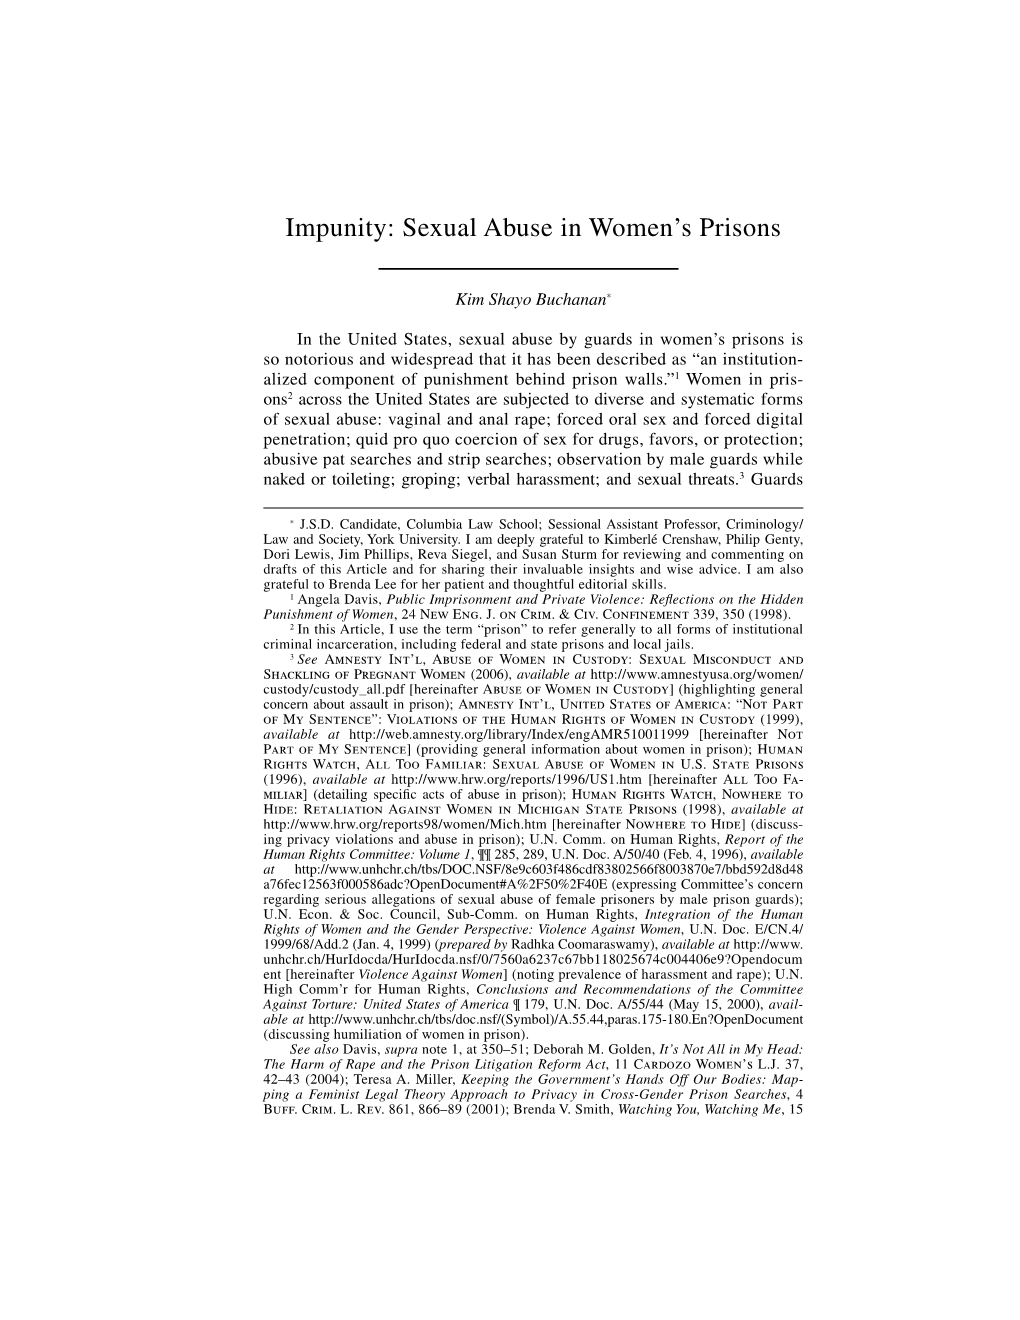 Sexual Abuse in Women's Prisons